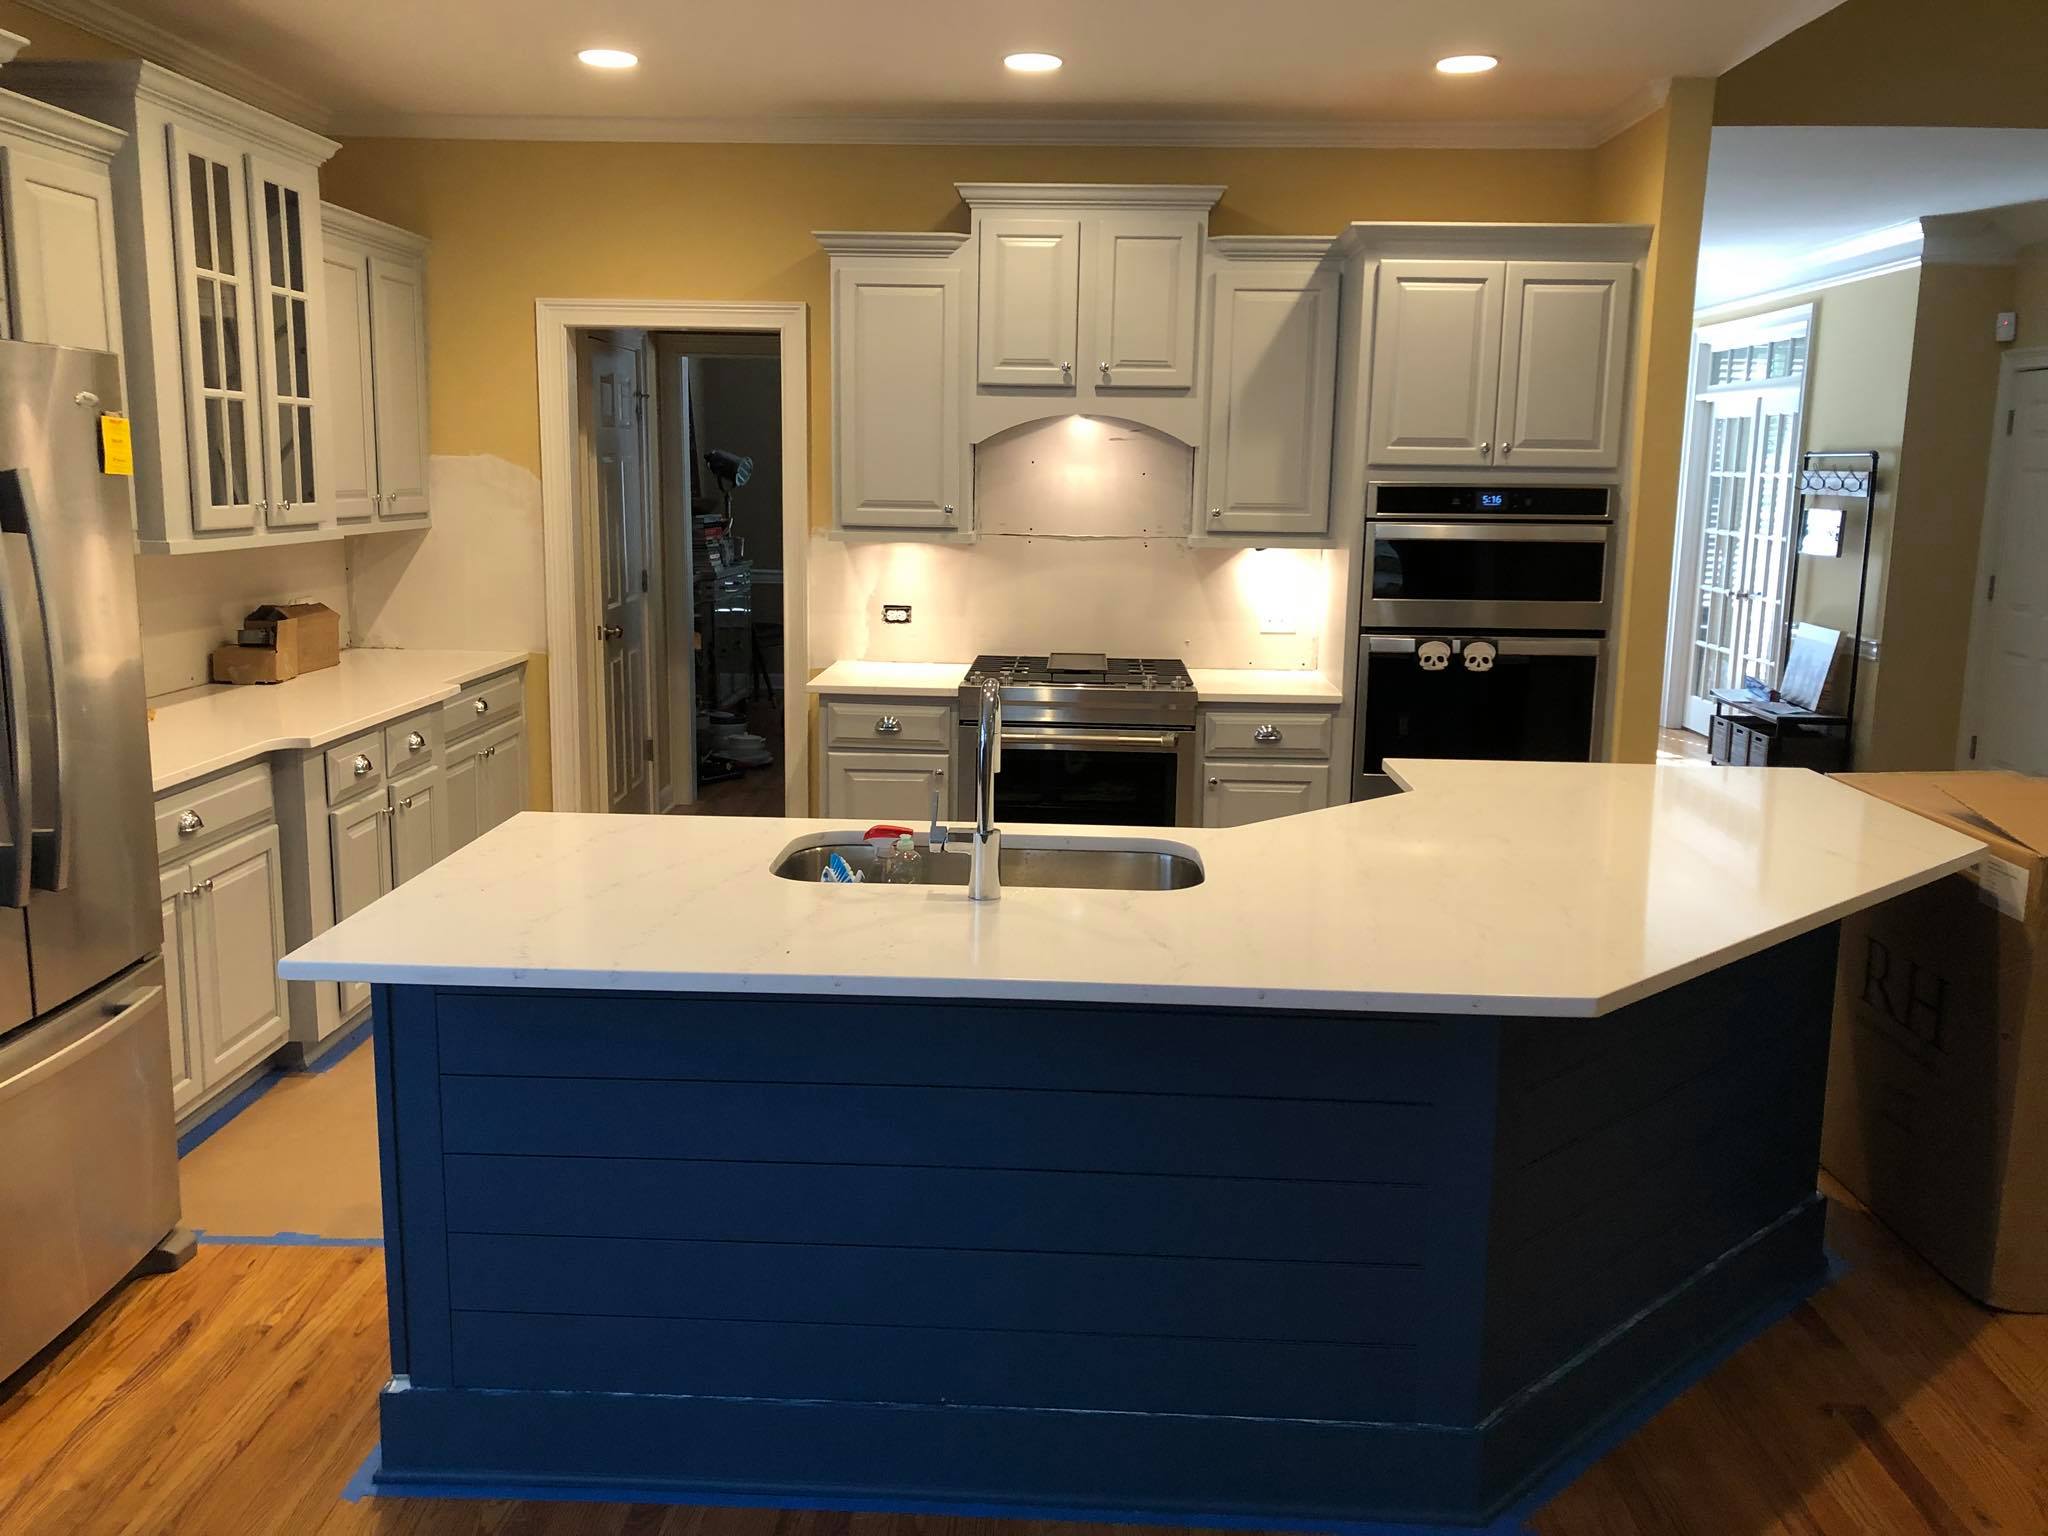 Full Kitchen Remodeling with New Painted Cabinets